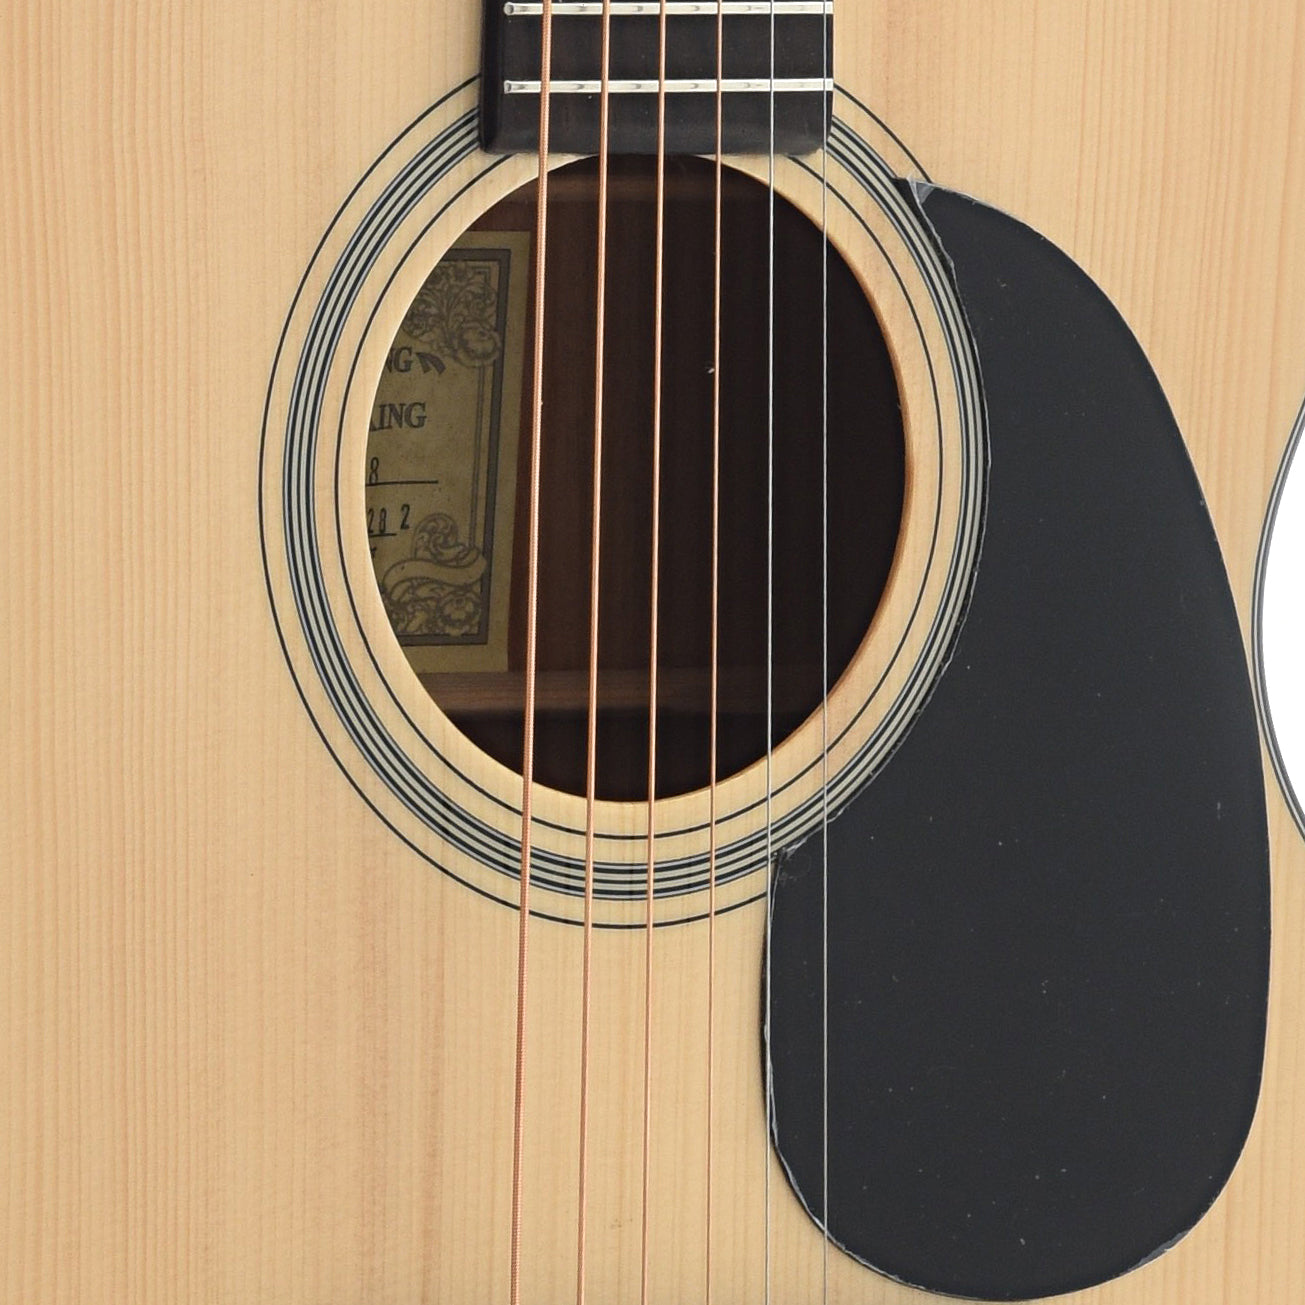 Soundhole and Pickguard of Recording King RO-318 Mahogany 000 Acoustic Guitar 